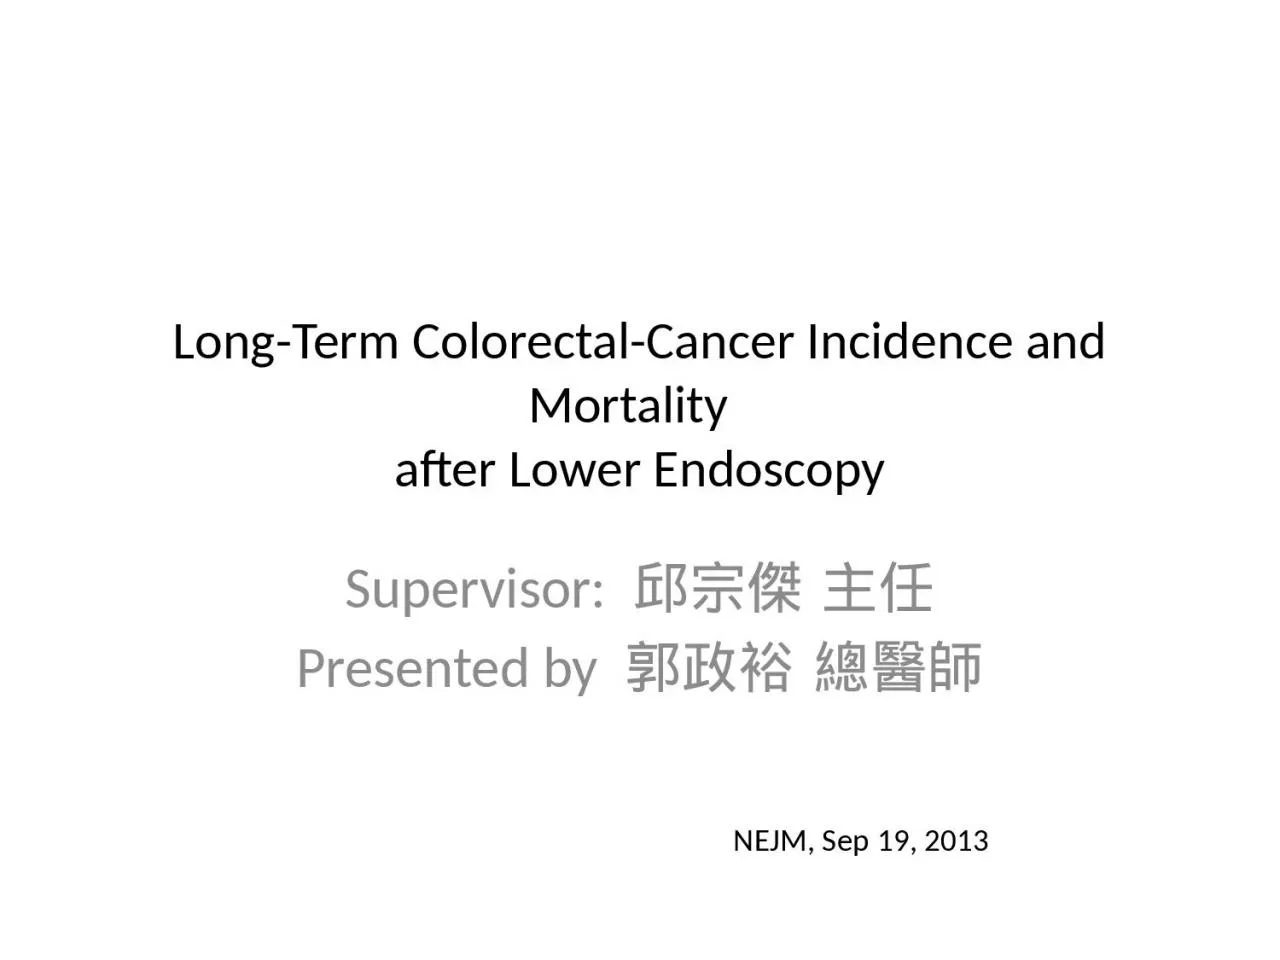 Long-Term Colorectal-Cancer Incidence and Mortality